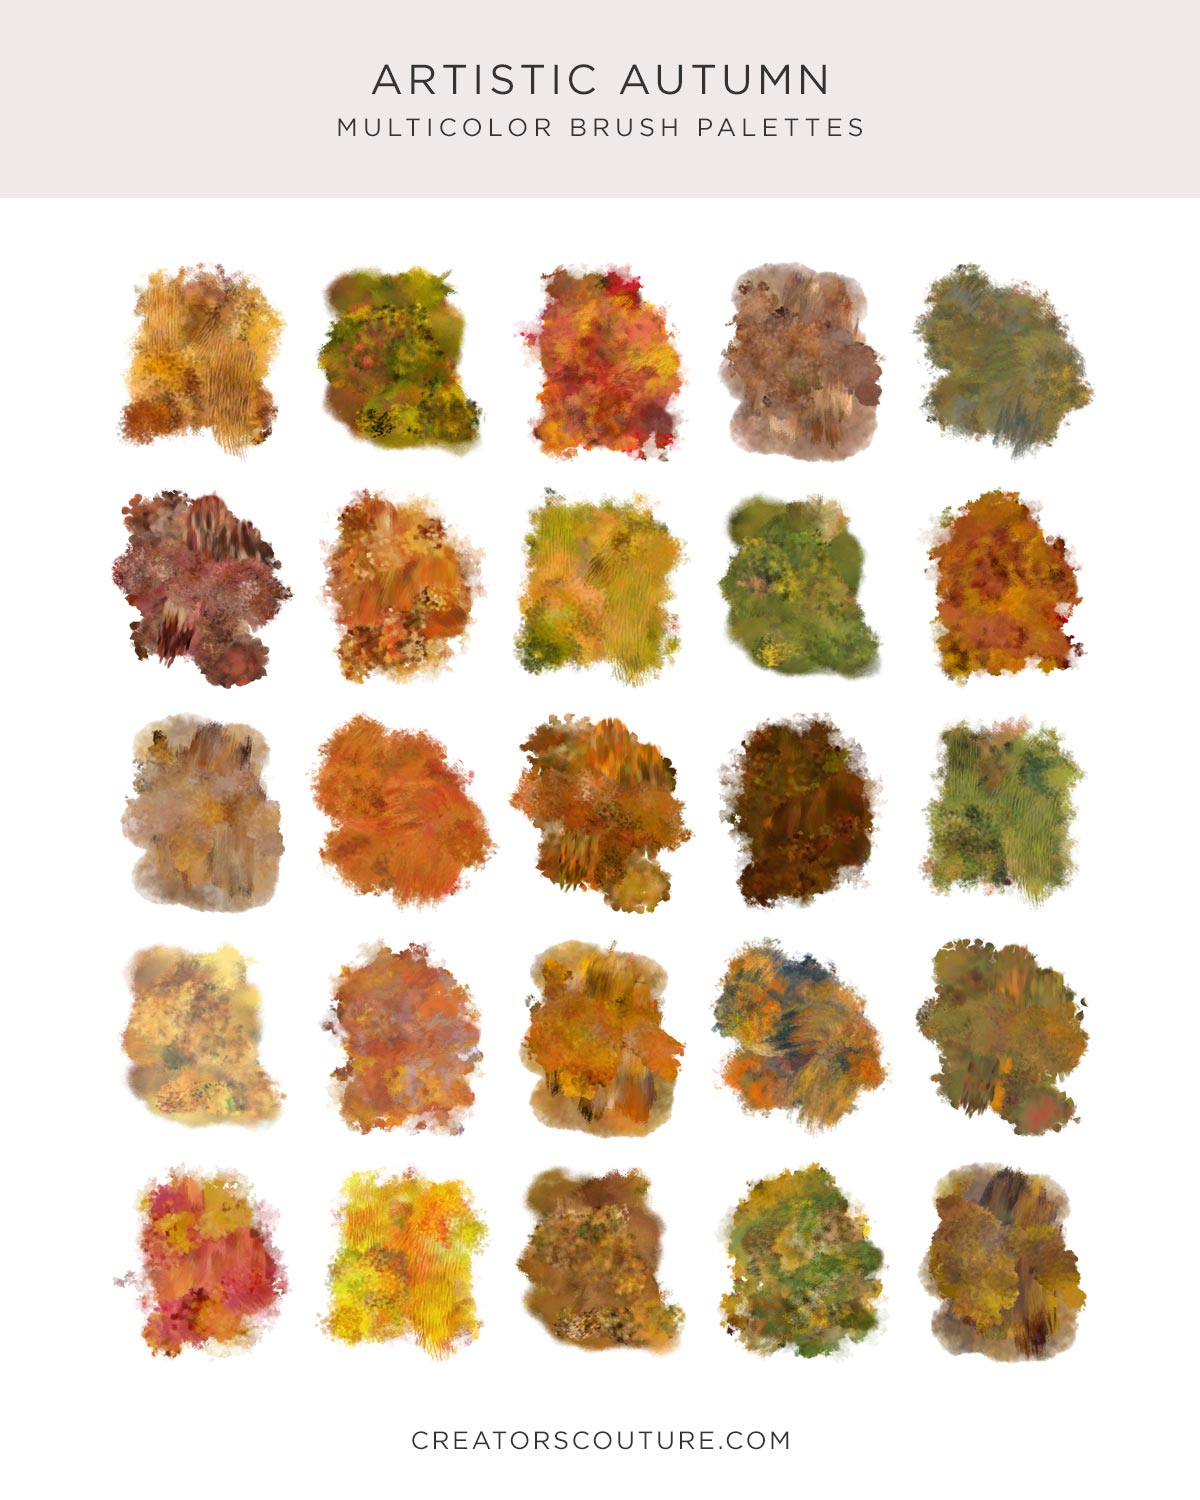 Artistic Autumn Multicolor Brushes by Creators Couture rendition image